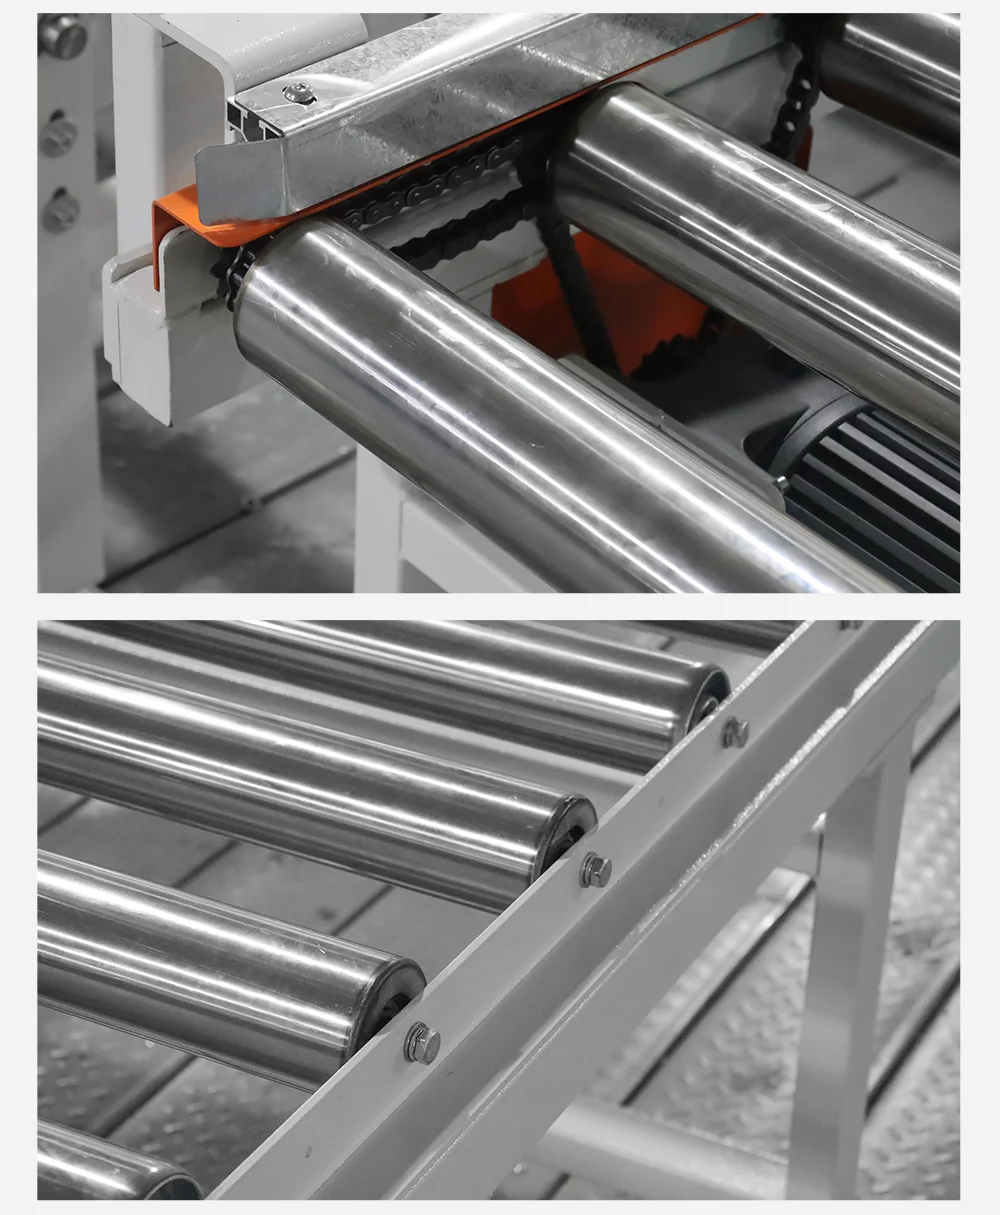 Precision and Efficiency: Motorized Roller Conveyor for Effective Material Flow details